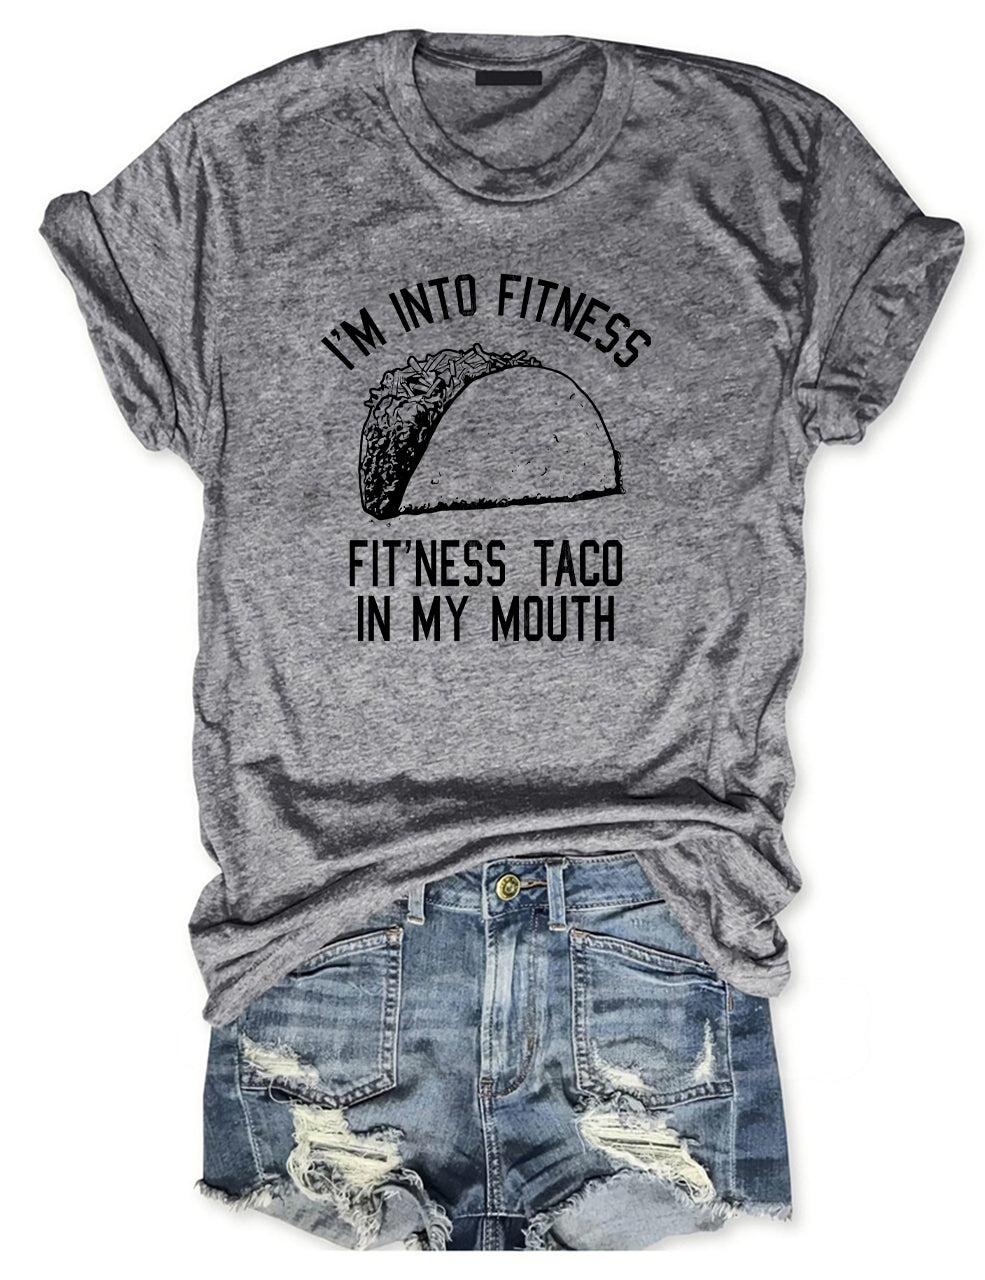 I'm Into Fitness Taco Into My Mouth T-shirt